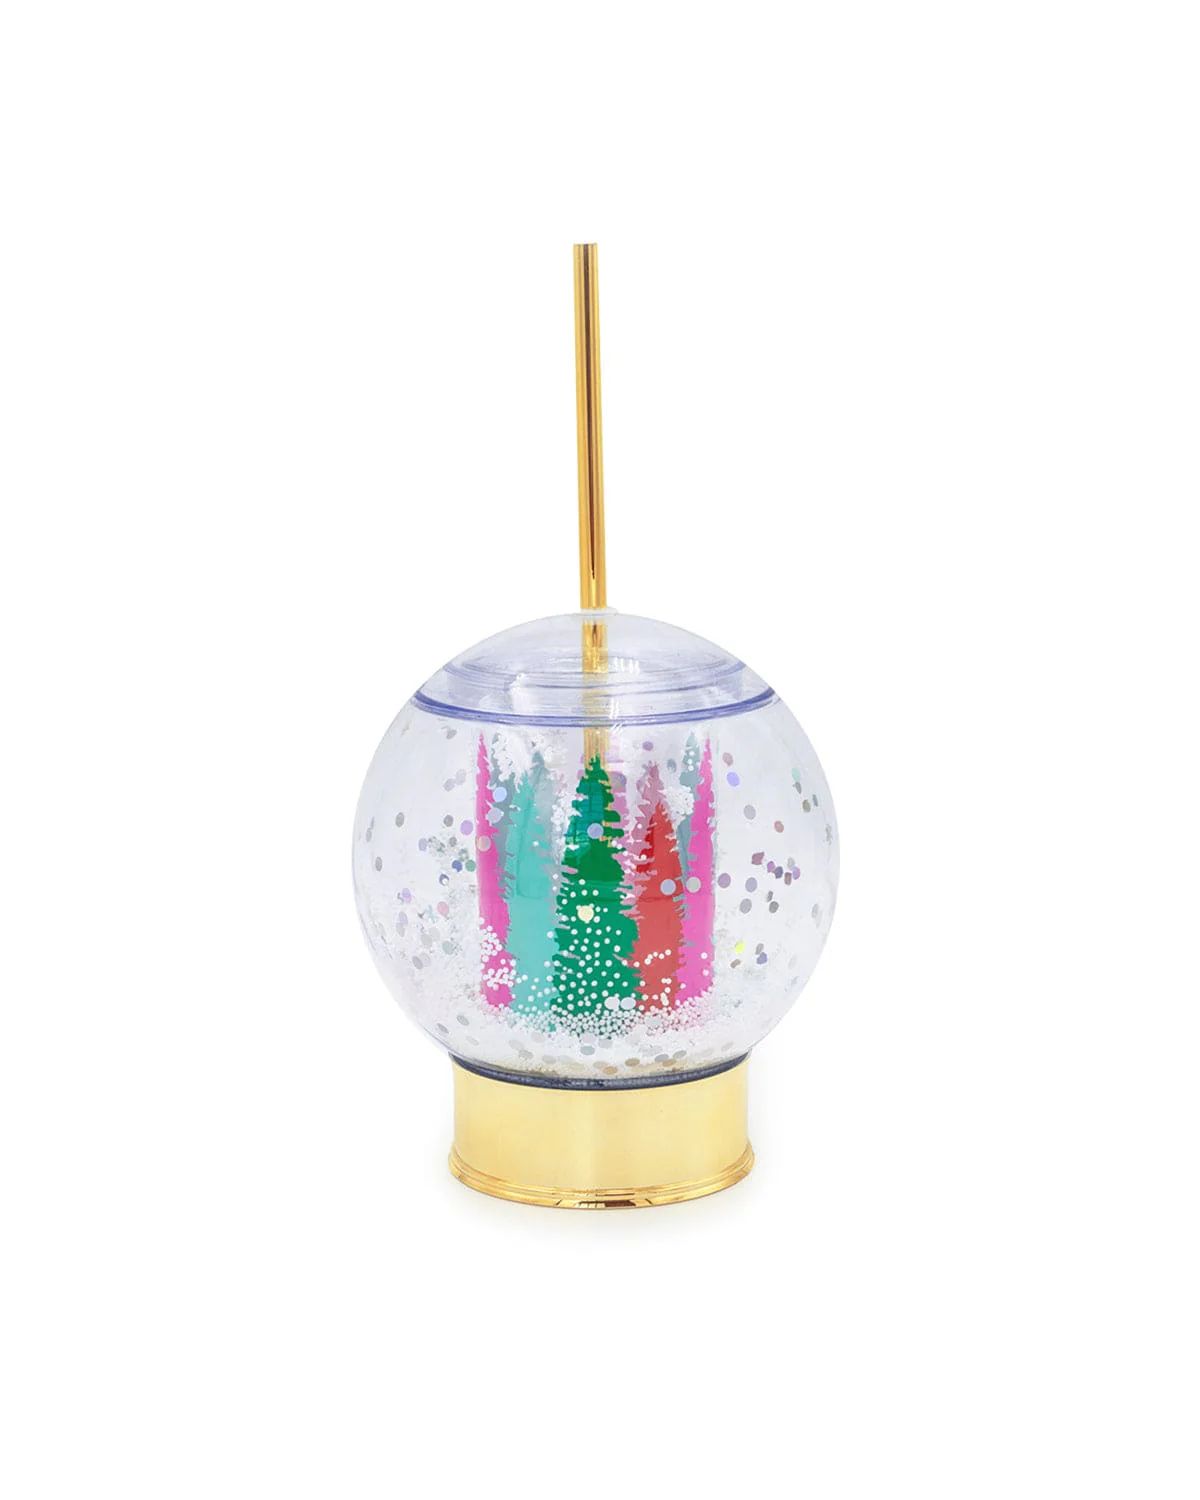 The New Winter Wonderland Snow Globe Novelty Sipper | Packed Party